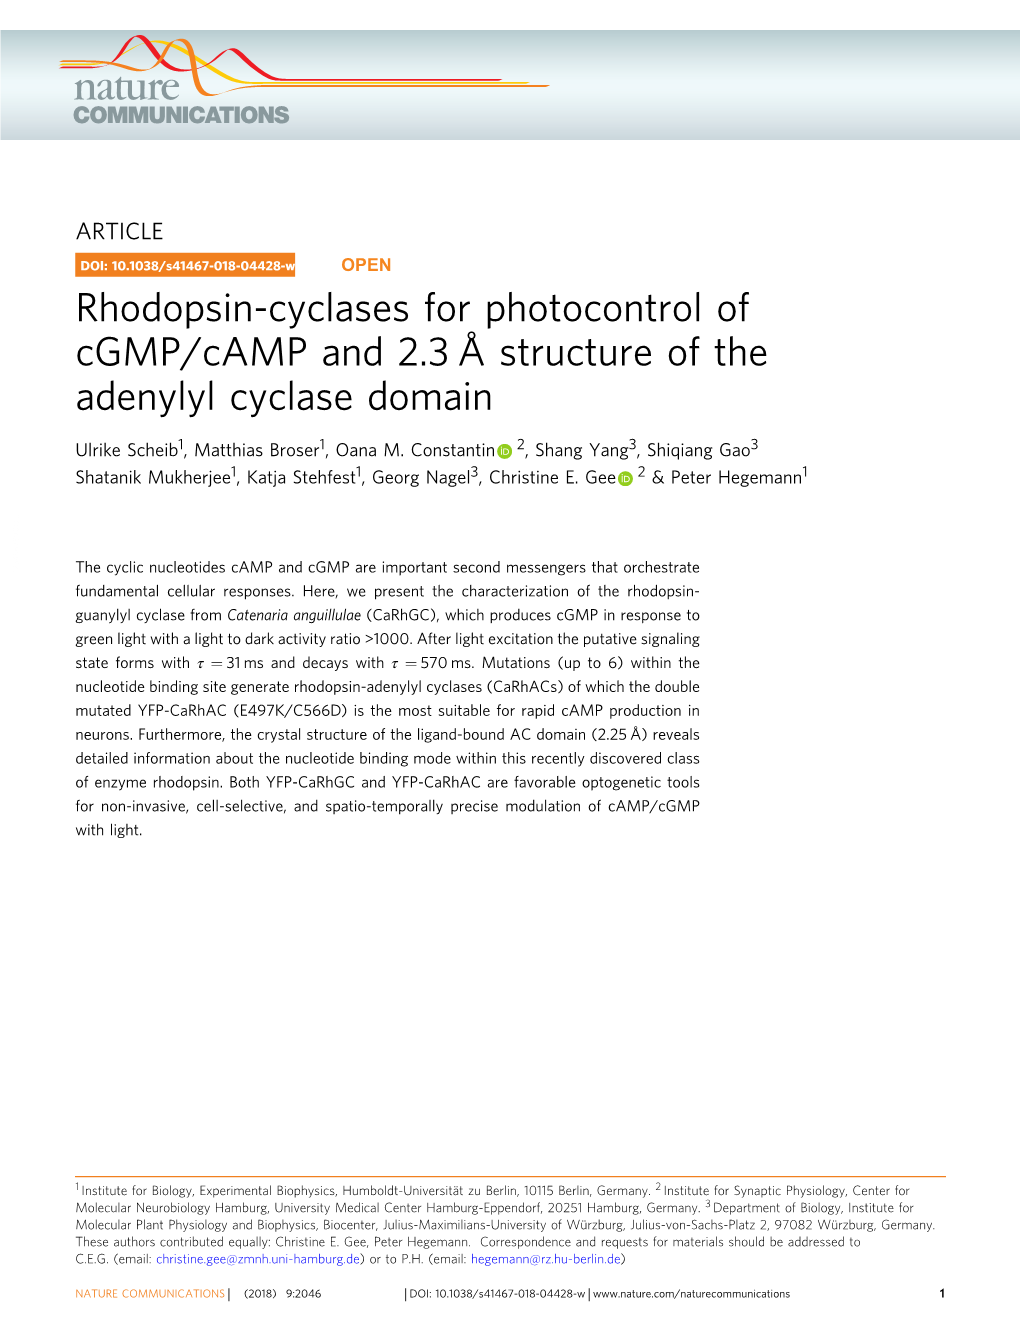 Rhodopsin-Cyclases for Photocontrol of Cgmp/Camp and 2.3 Å Structure of the Adenylyl Cyclase Domain